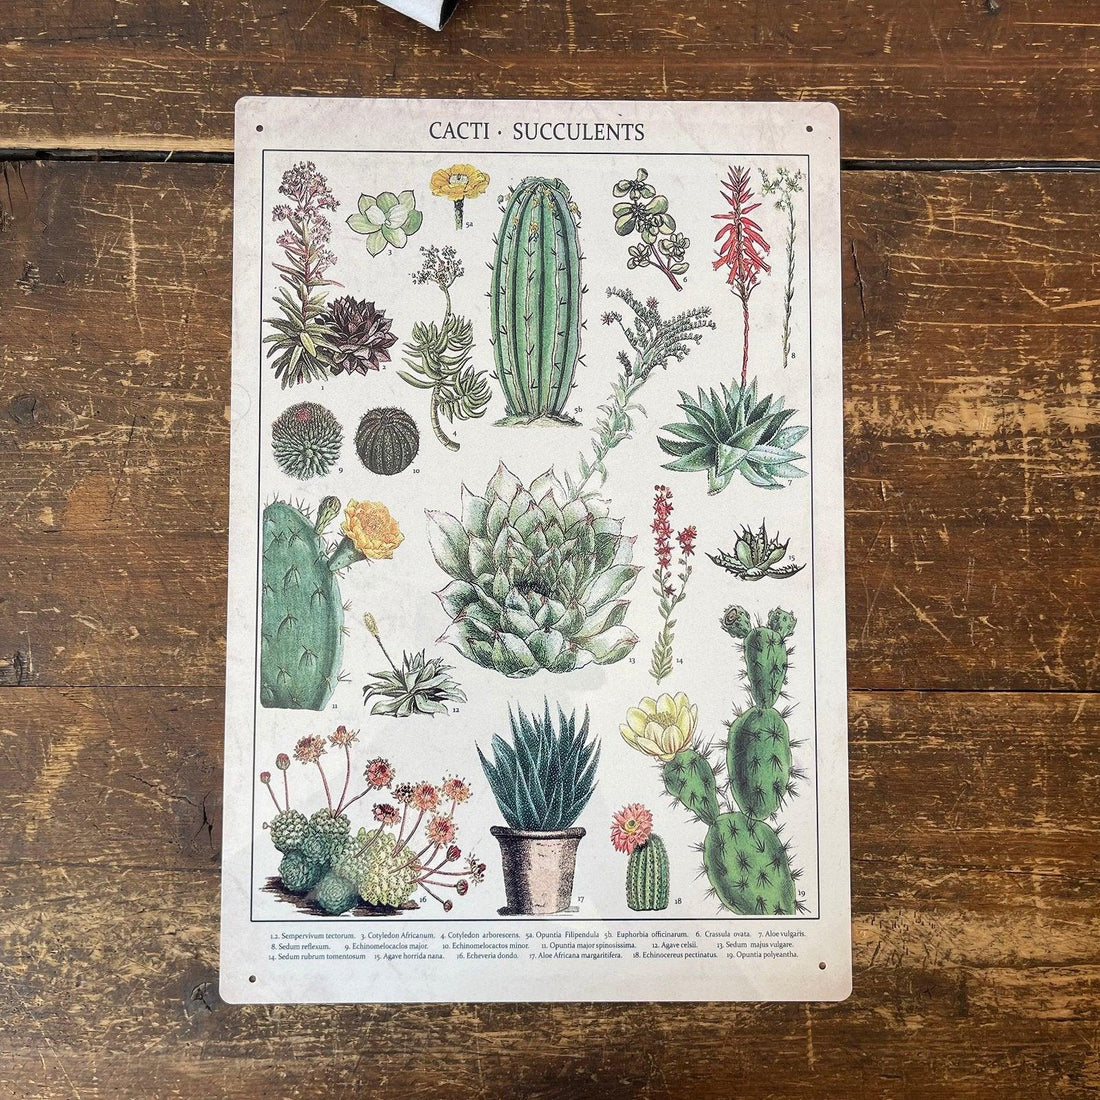 Vintage Metal Sign - Retro Cacti & Succulents Identification Picture - £27.99 - Signs & Rules 